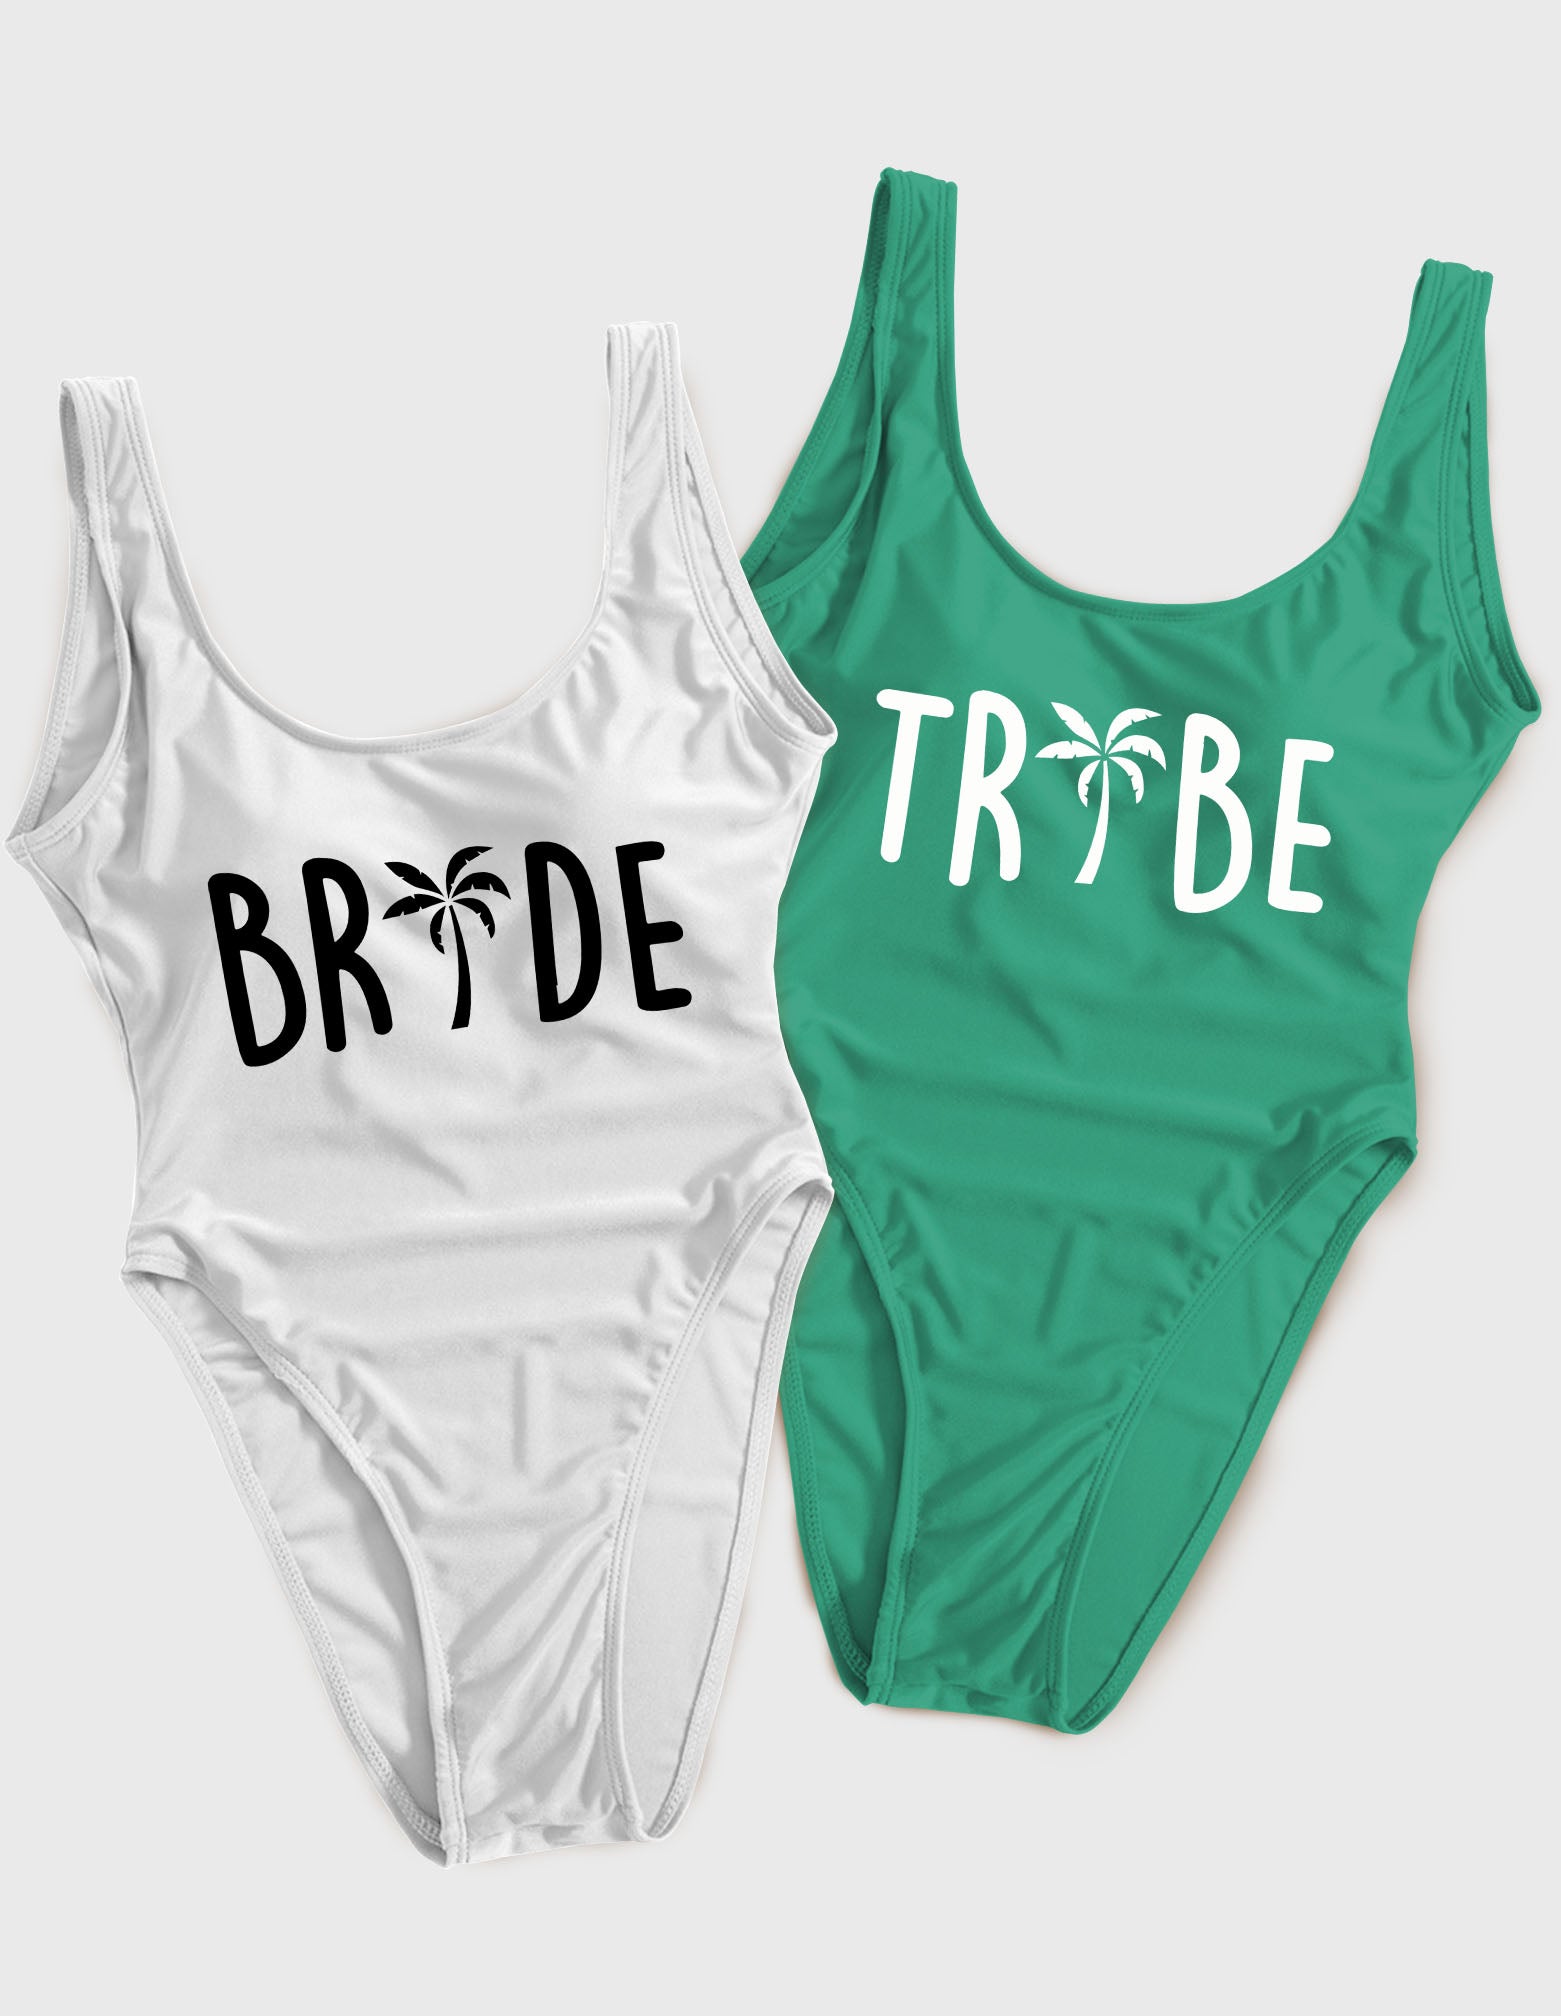 Bride & Tribe - Tree Style (66) Swimsuit